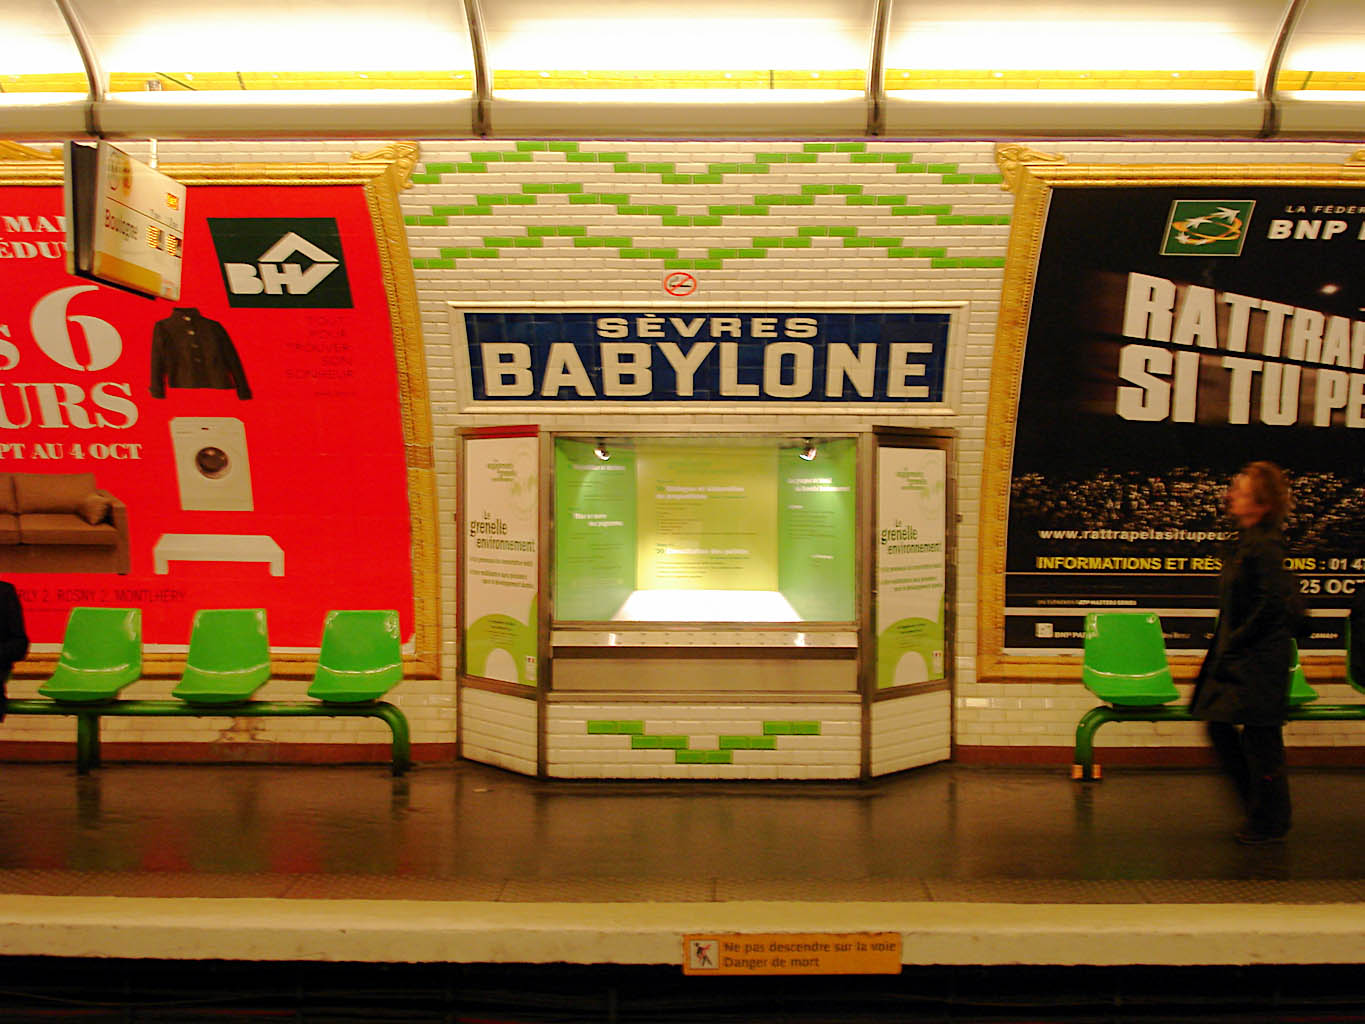 Metro station platform. A sign reads SÈVRES BABYLONE, with the word SÈVRES in small letters and BABYLONE in large